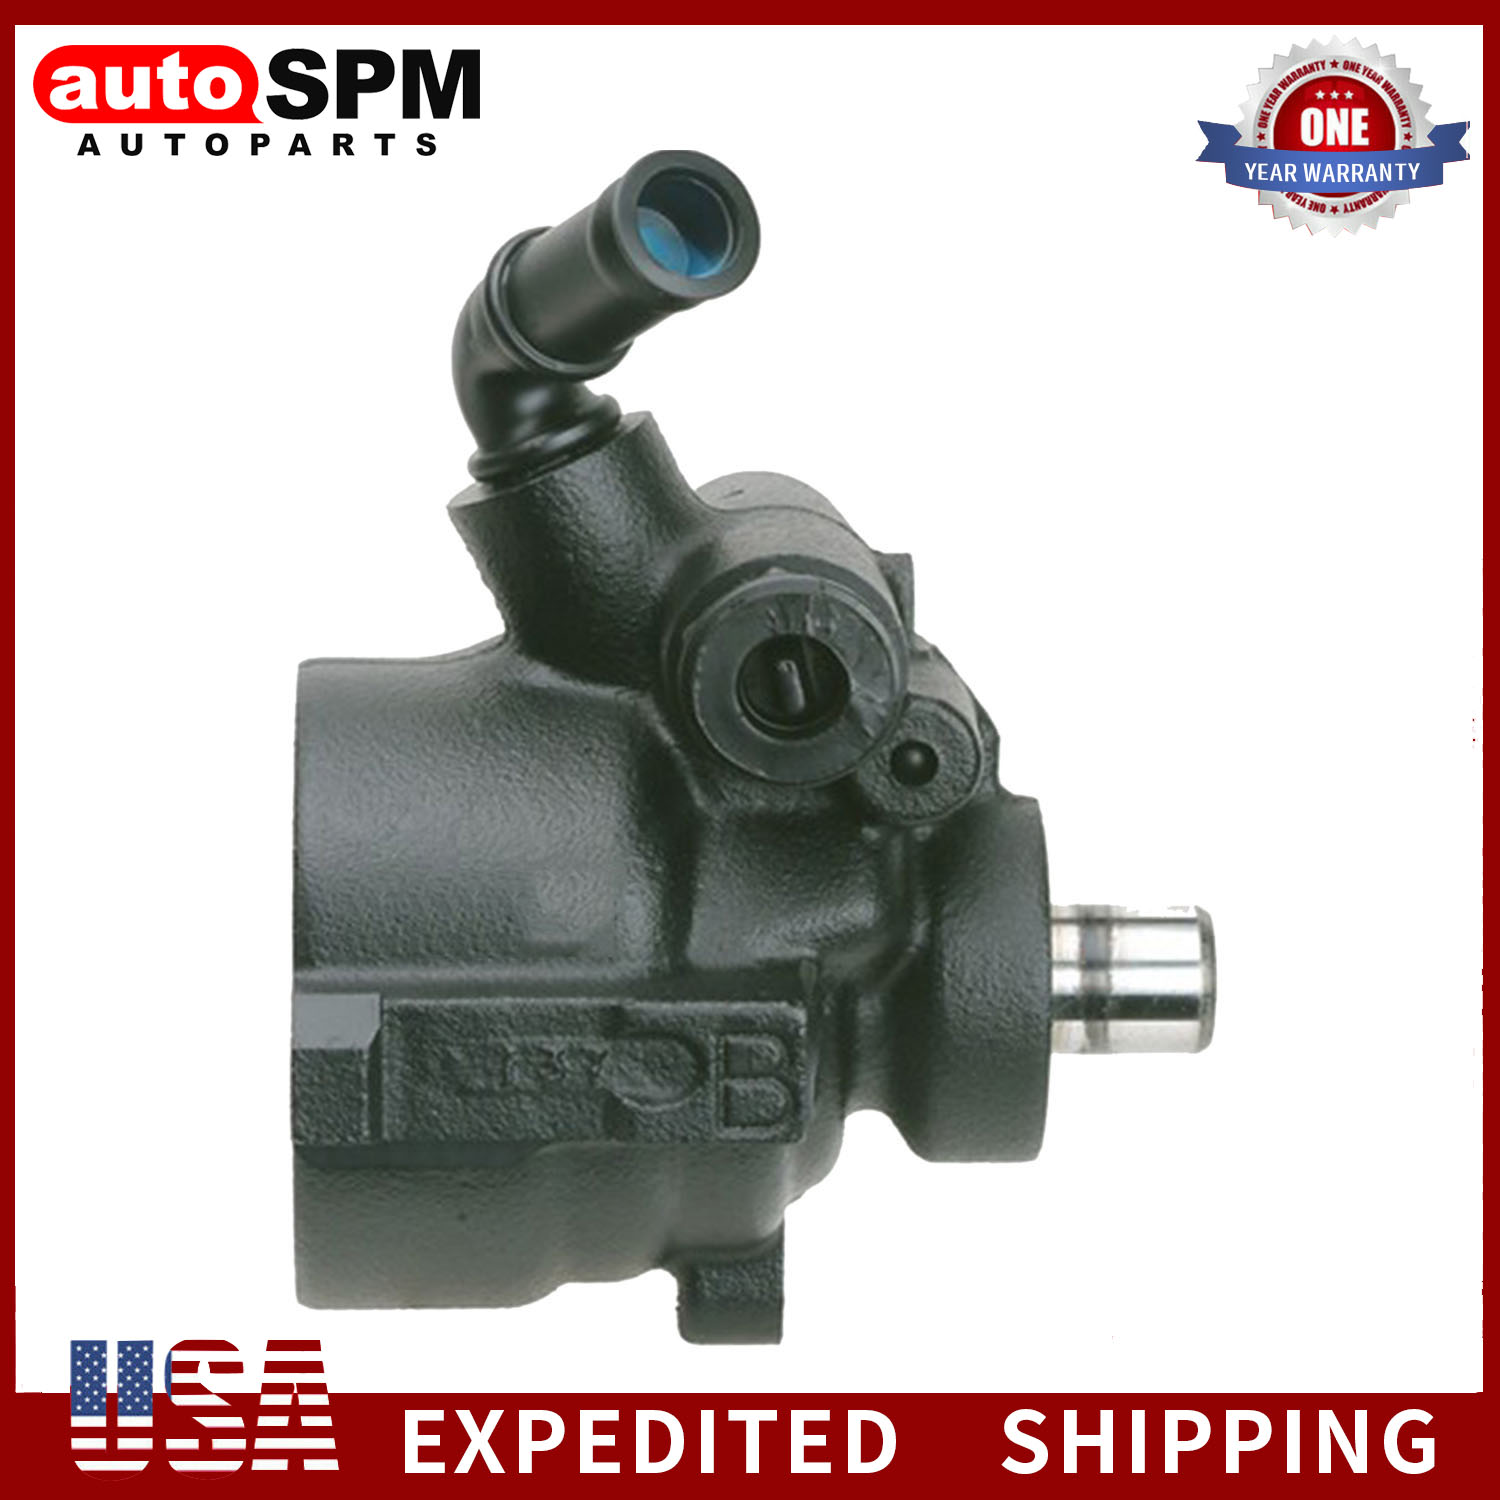 OE-Quality Competely New Power Steering Pump for Buick Chevy Pontiac 5.3L